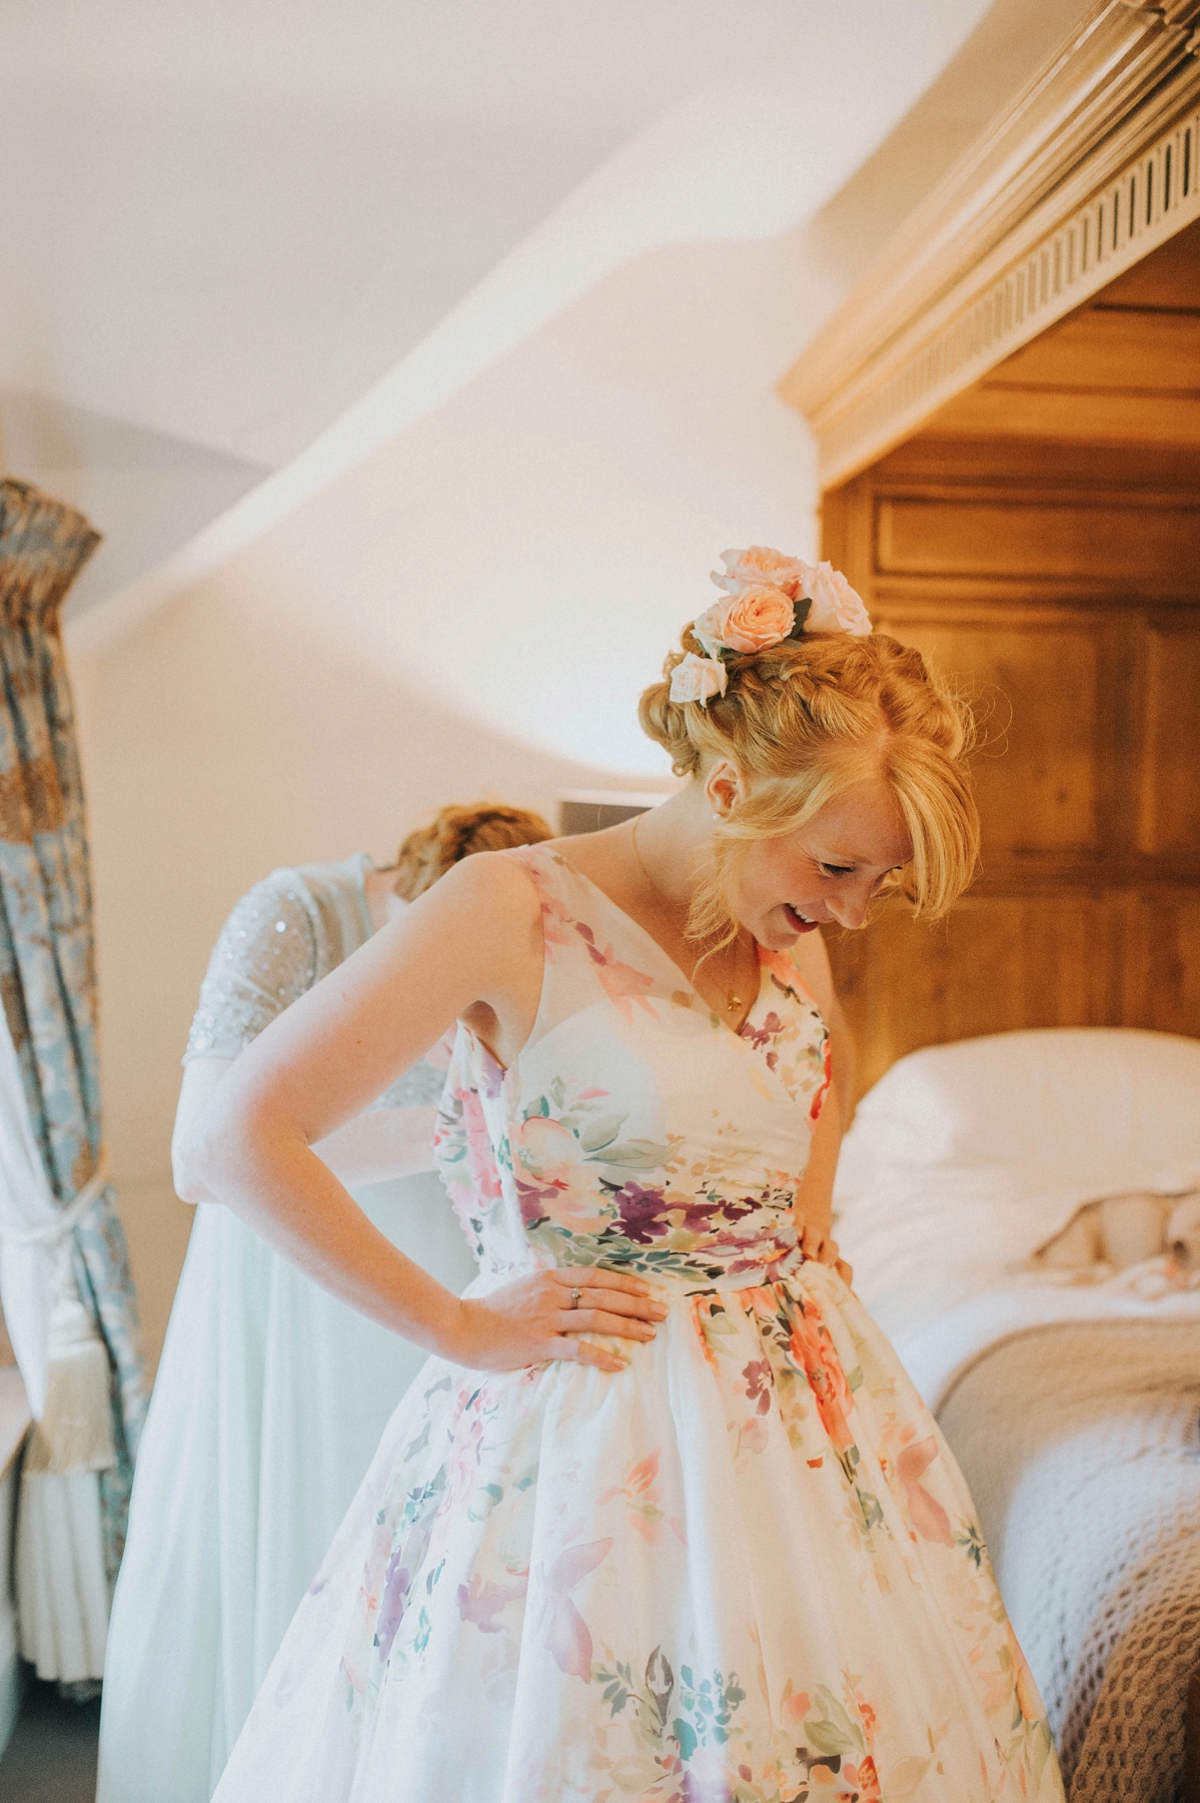 3 Floral wedding dress by Charlotte Balbier